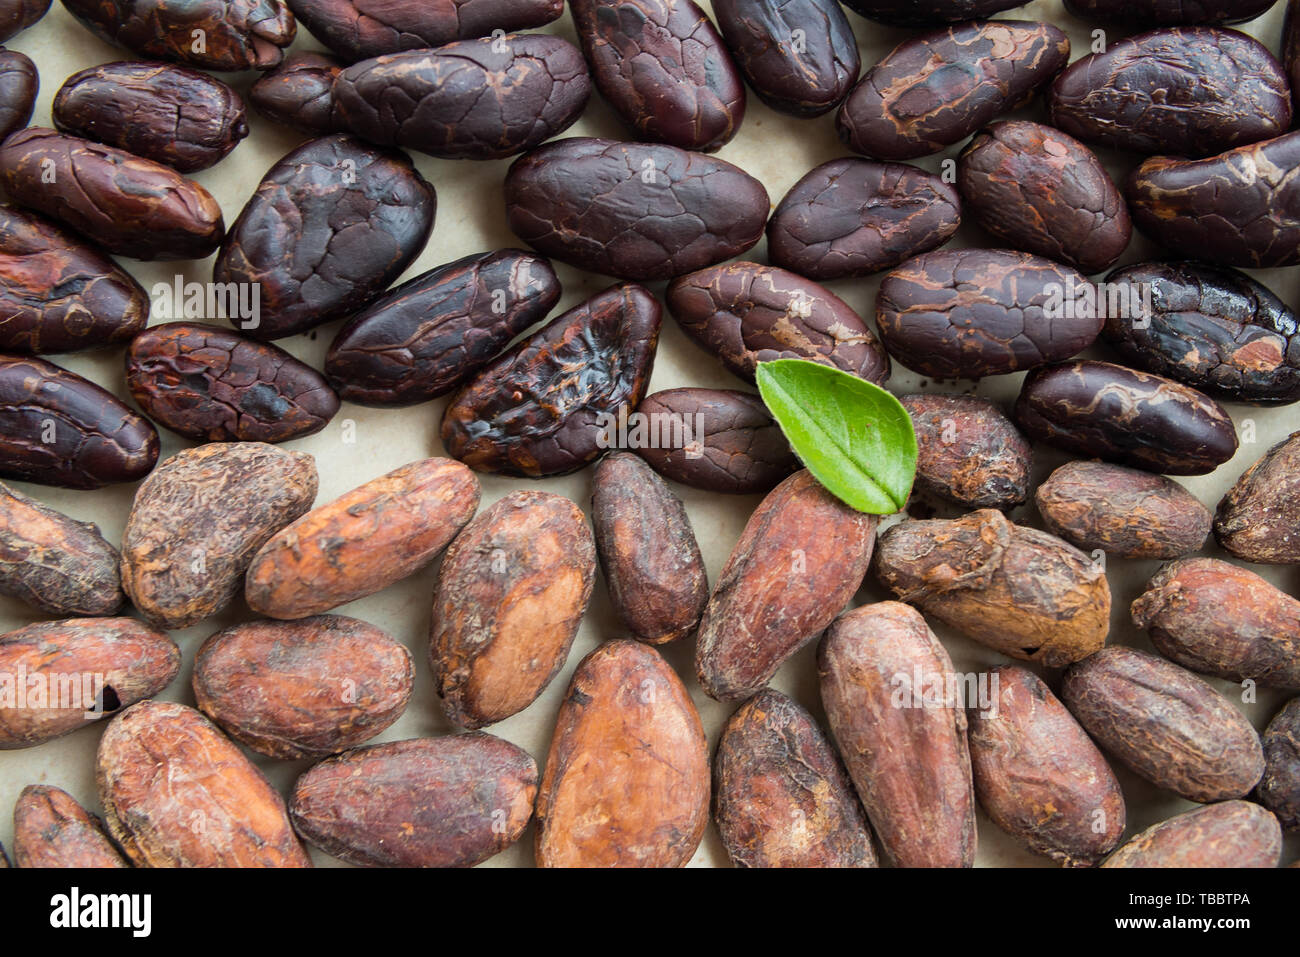 Cocoa beans with and without skin. Stock Photo